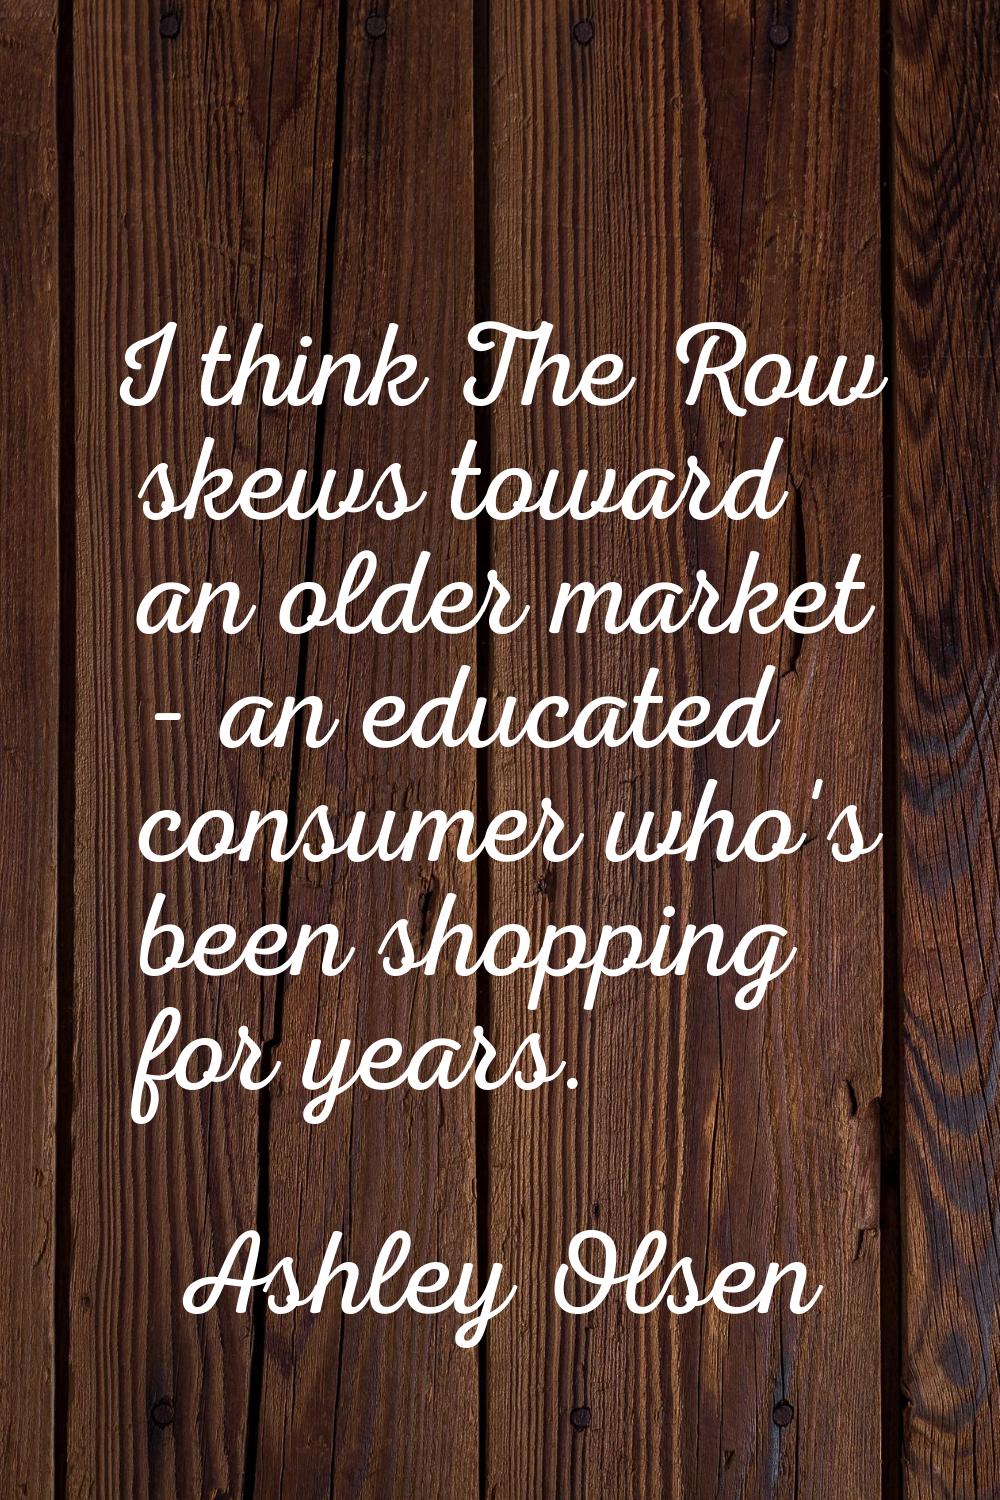 I think The Row skews toward an older market - an educated consumer who's been shopping for years.